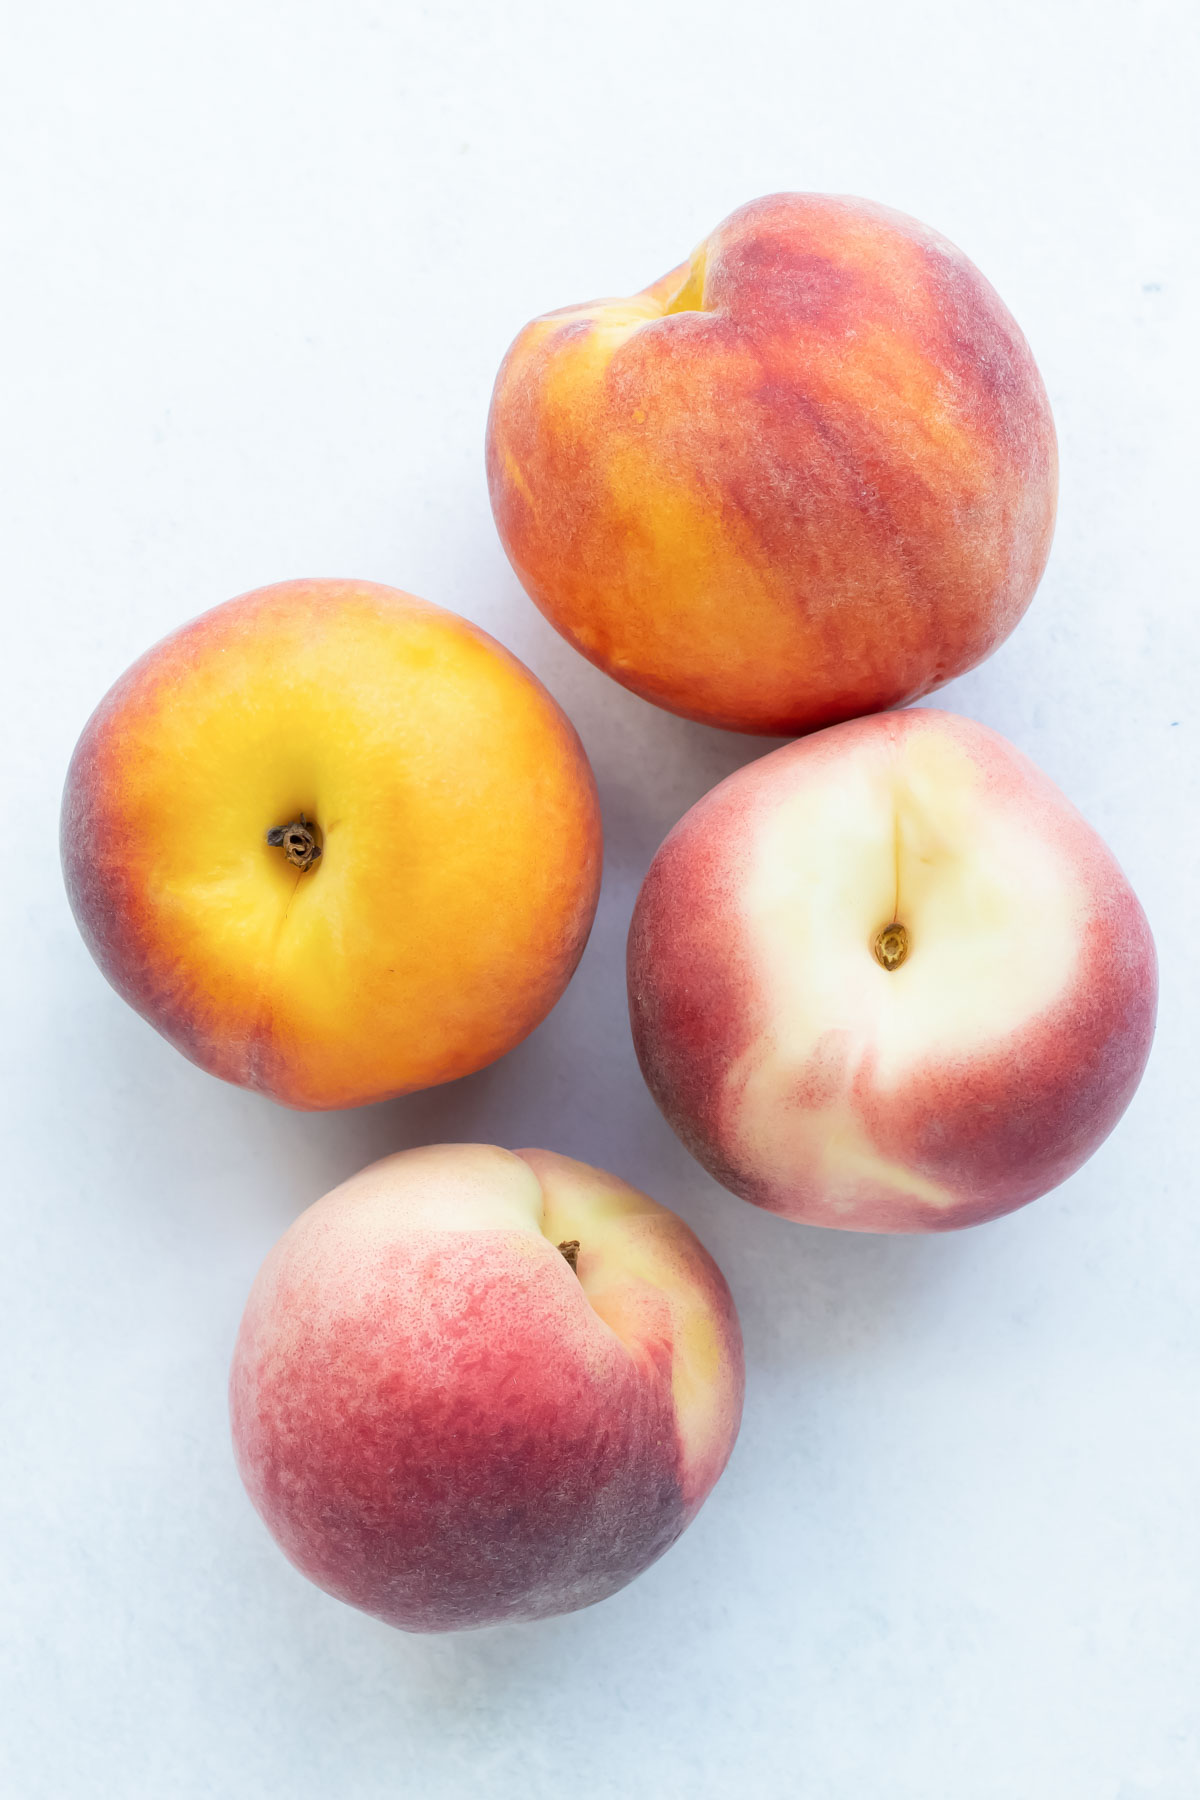 Four ripe peaches are sitting on a white countertop.